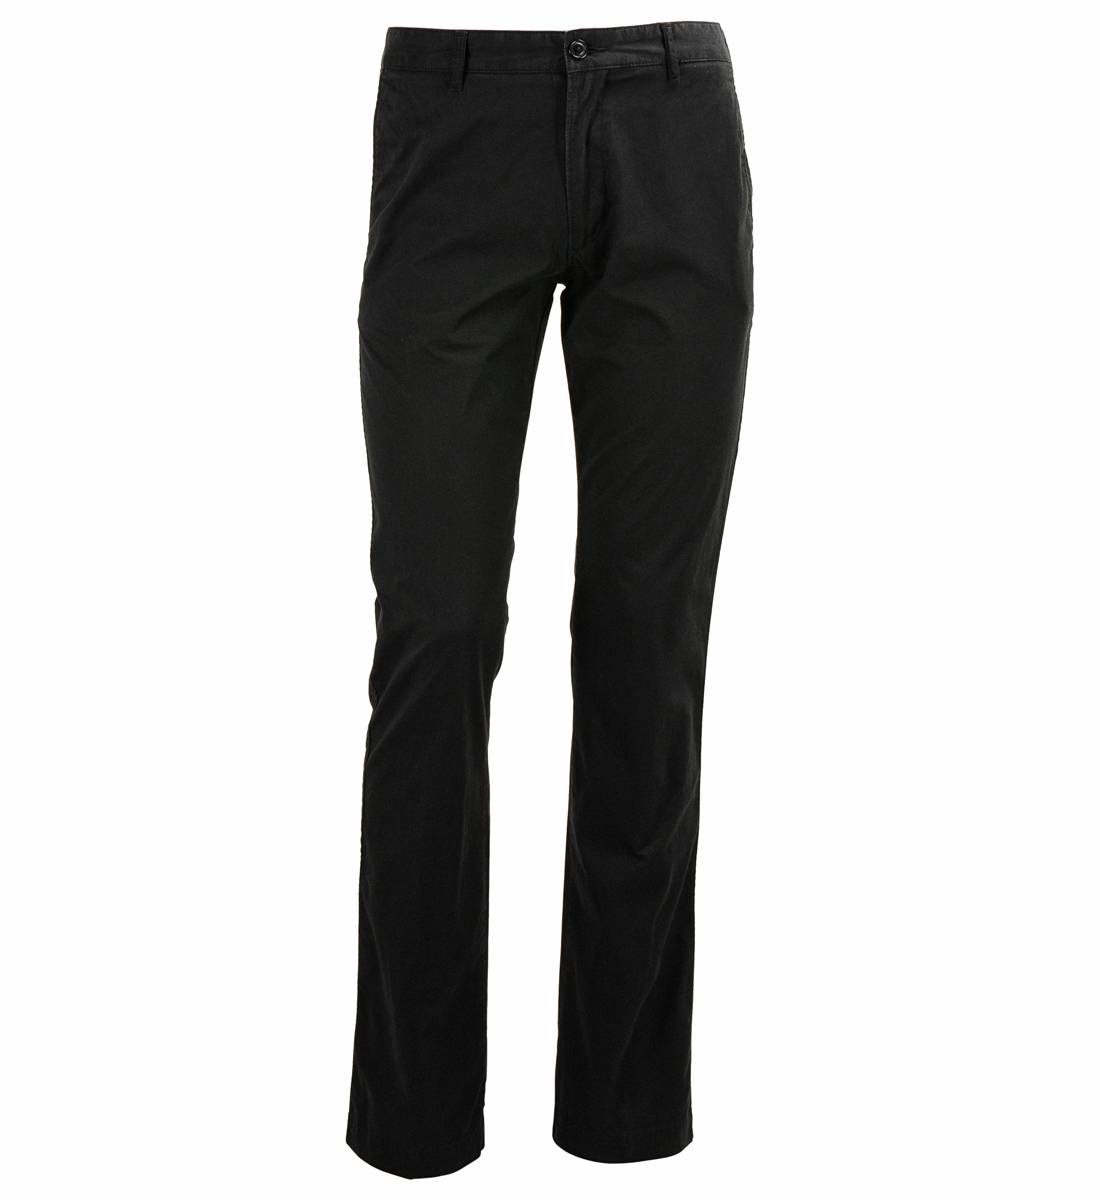 Chino Trousers - Hh7165